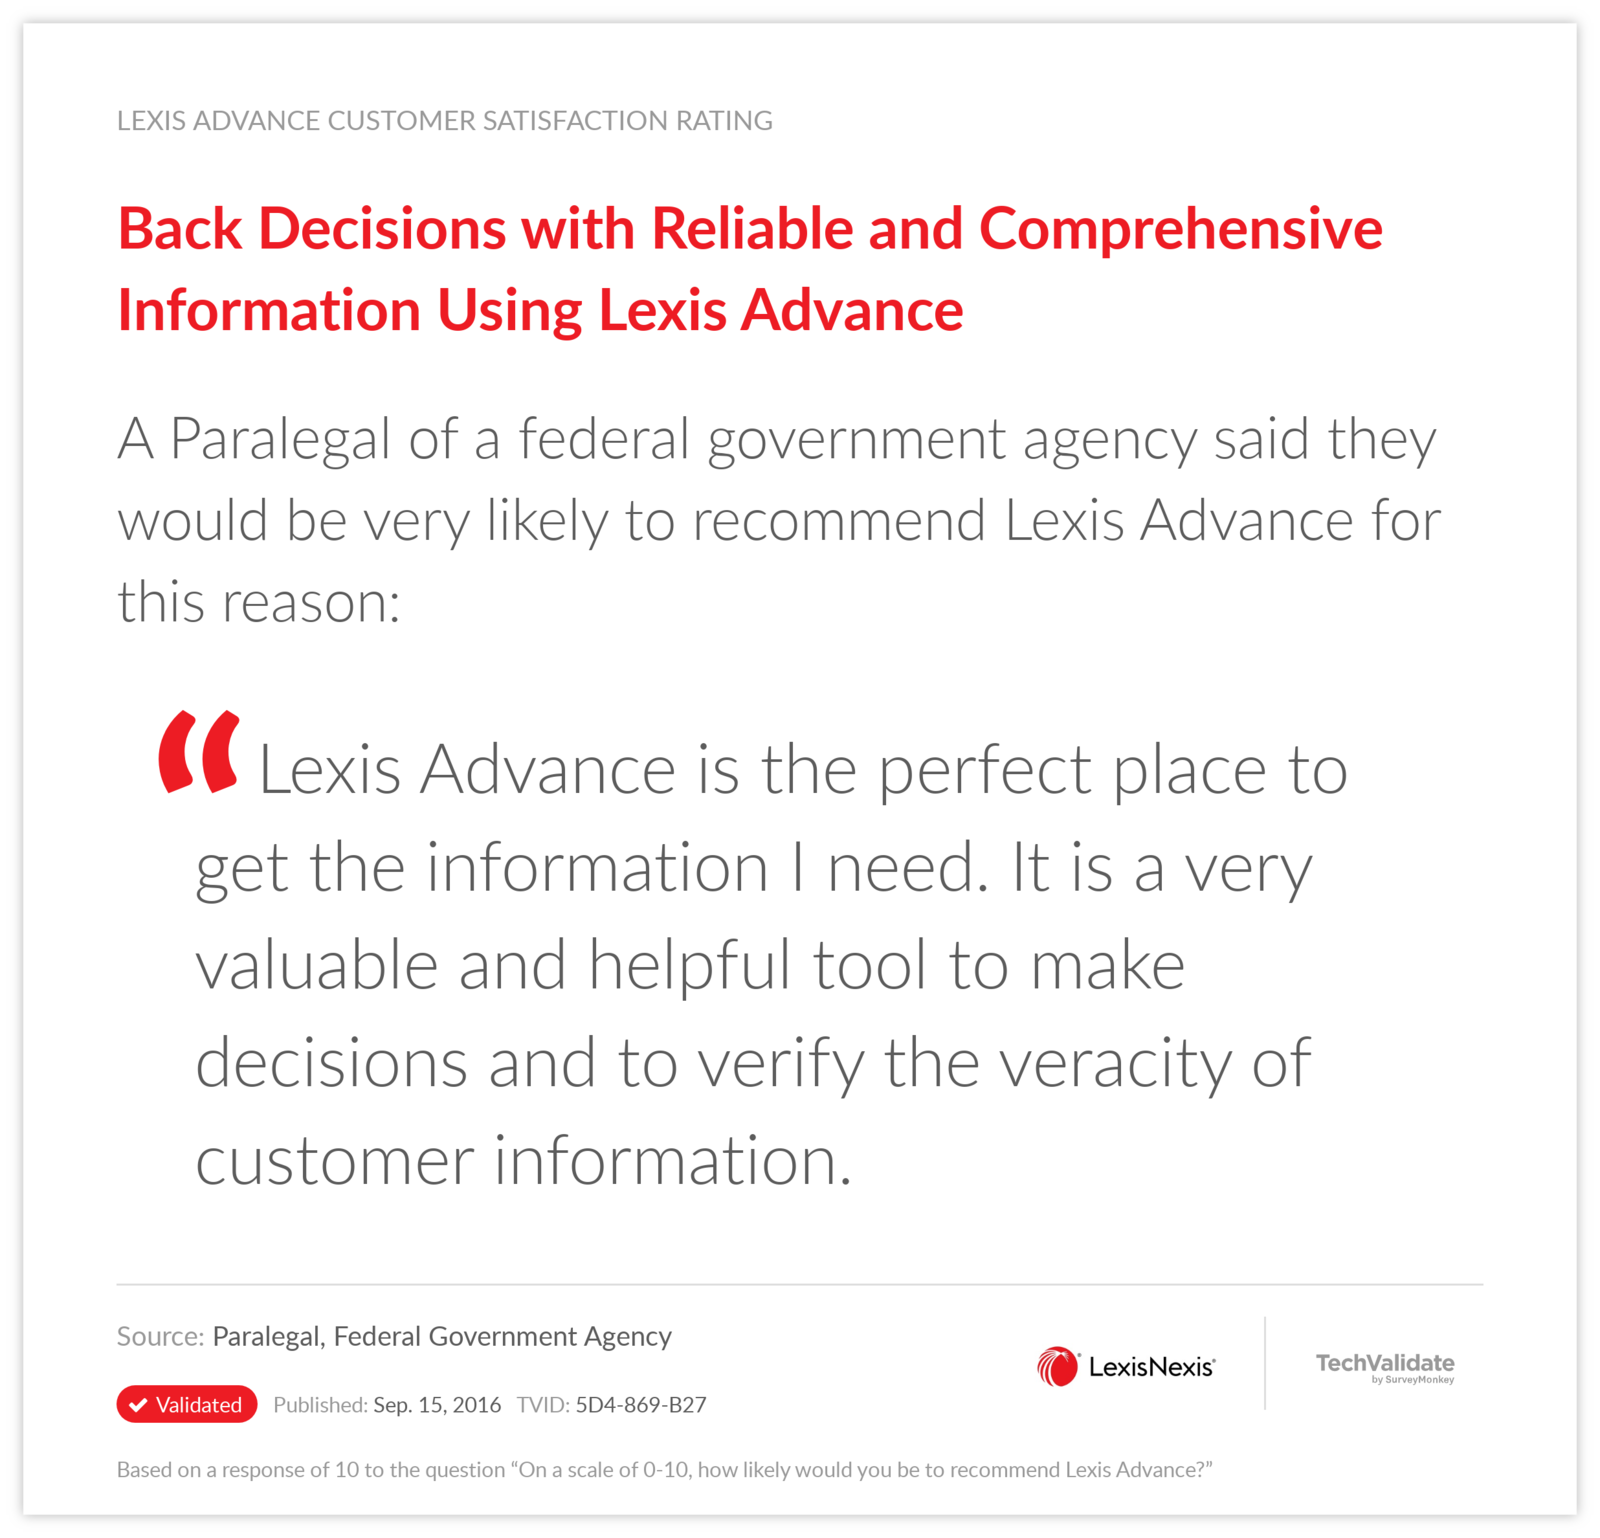 Back Decisions with Reliable and Comprehensive Information Using Lexis Advance